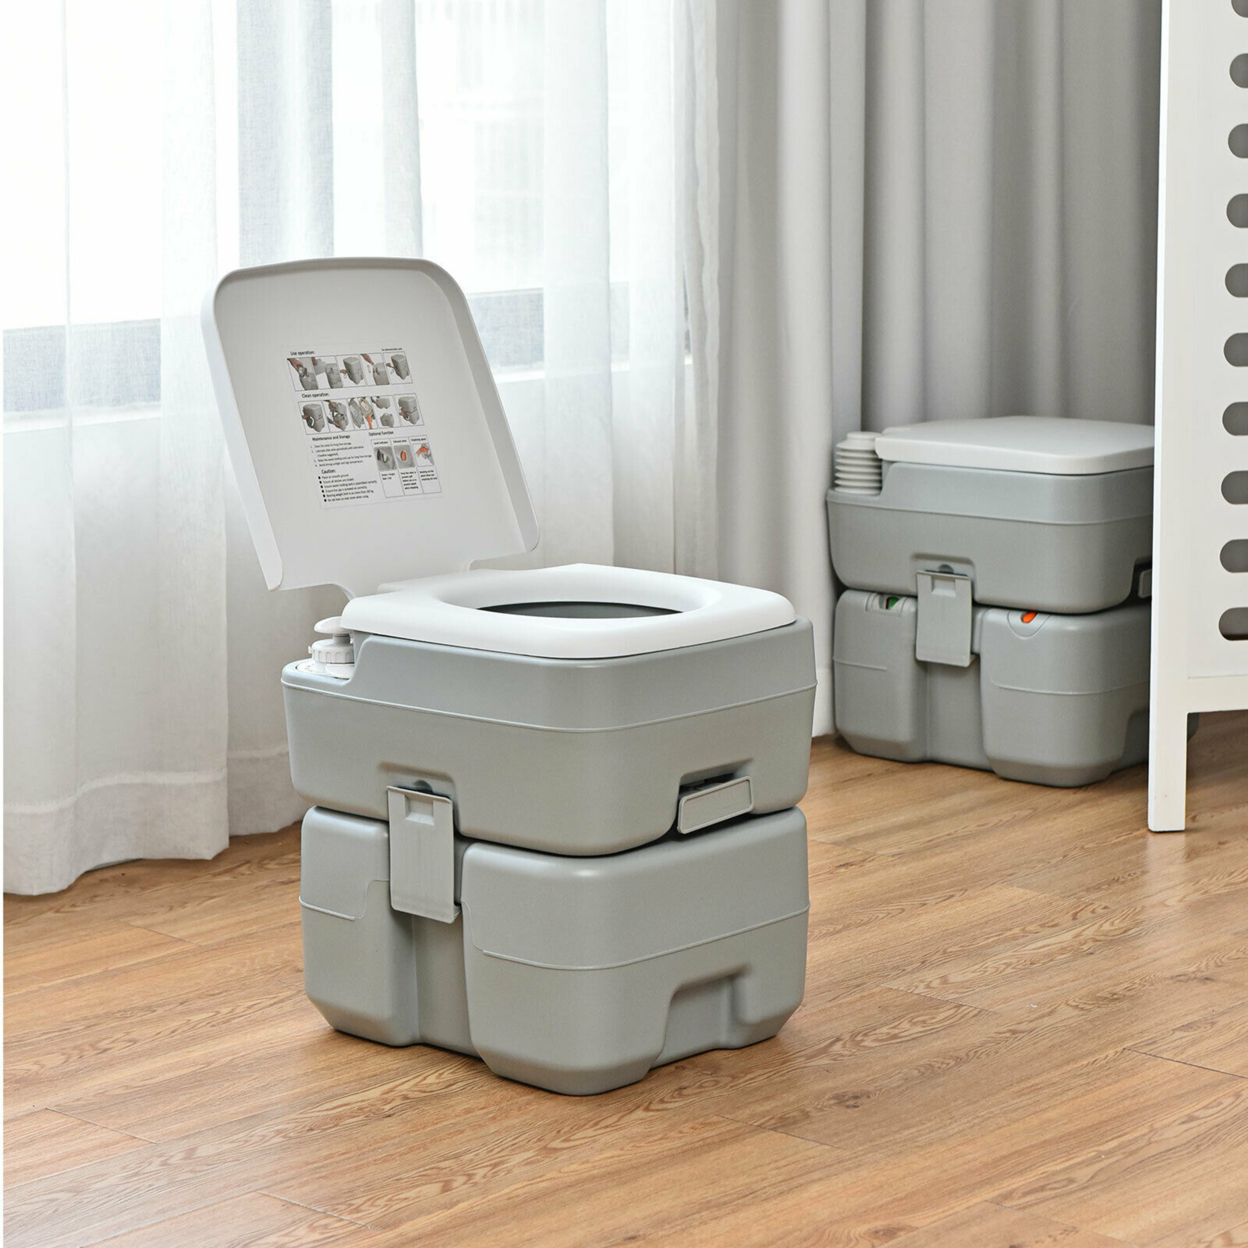 5.3 Gallon 20L Portable Travel Toilet RV Camping Potty Commode Indoor Outdoor